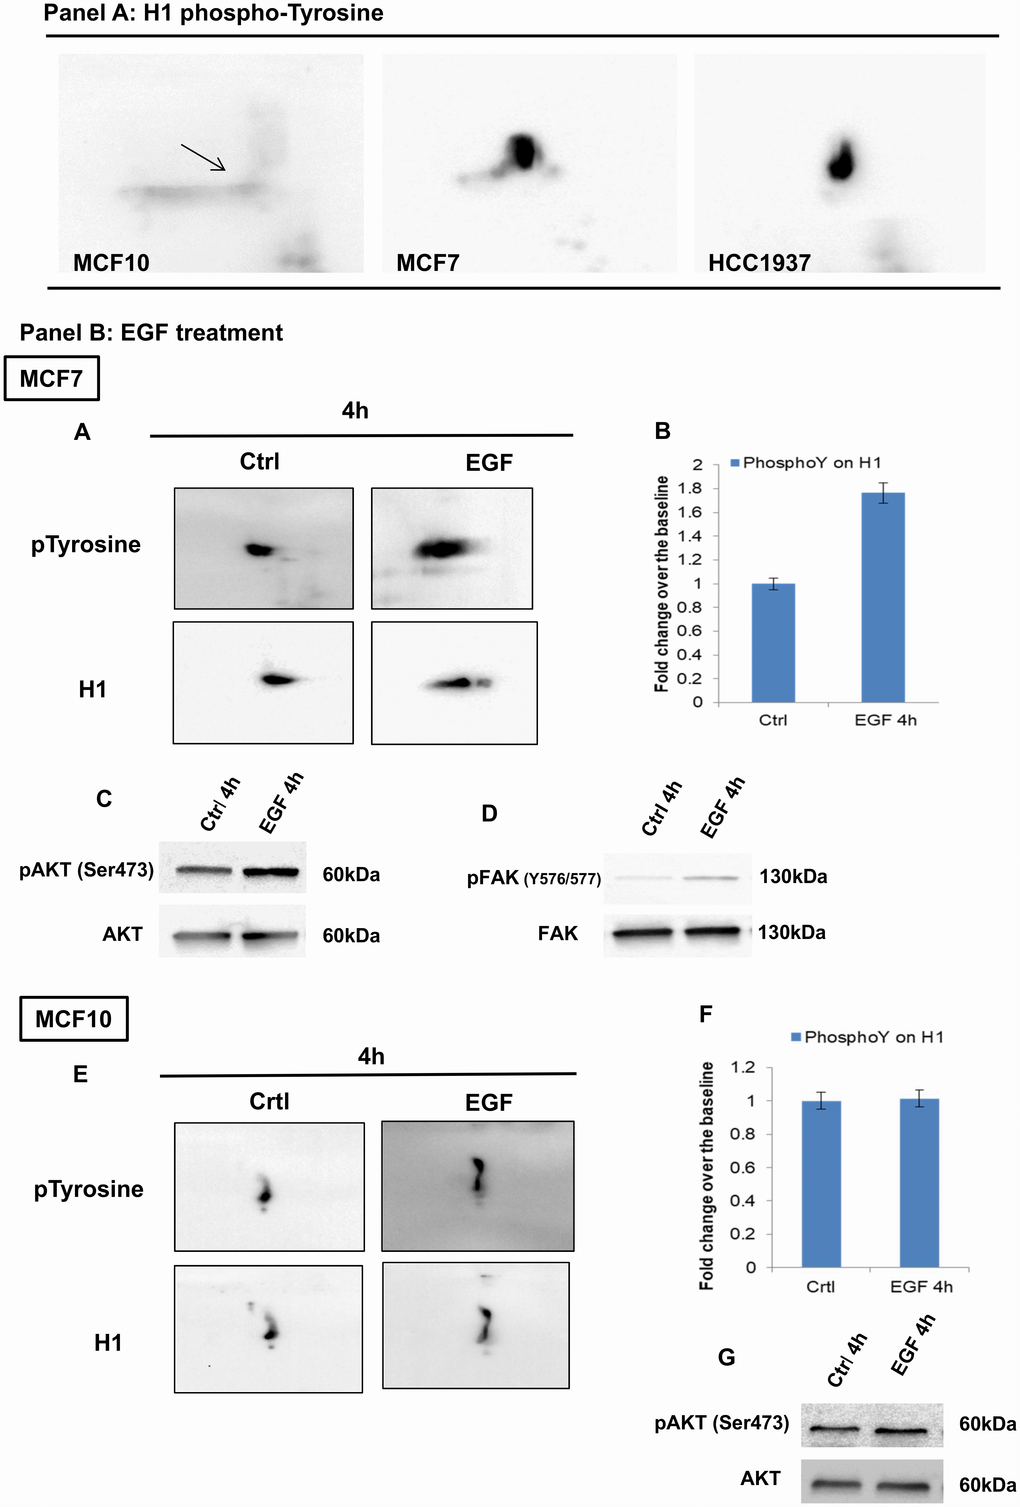 Analysis of H1 histone tyrosine phosphorylation in breast and normal cancer cells, using 2D-TAU western blot. (Panel A) 2D western blots showing tyrosine phosphorylation on the Histone H1 in MCF10, MCF7 and HCC1937 cells. Arrow indicates the region corresponding to the phosphorylated protein. Blot images were acquired using Alliance 2.7 (UVITEC, Eppendorf, Milan, Italy). Membranes signals were acquired concomitantly at 4 seconds. (Panel B) (A) 2D TAU western blot analysis of histone H1 tyrosine phosphorylation on MCF7 cells (acquisition time: 4’’) and (E) MCF10 cells (acquisition time: 20’’) following EGF stimulation. Lower panels indicate the relative normalization with H1 antibody; the relative densitometry analyses are shown in B for MCF7 cells and in F for MCF10 cell lines. The assays were repeated in three independent biological replicates Data are expressed as mean ± SEM (N =3). (C, G): Western blot analysis of pAKT and AKT levels on whole protein extracts from EGF treated MCF7 and MCF10 cells, respectively. (D) Western blot analysis of pFAK (Y576/577) levels on whole protein extracts from EGF treated MCF7.